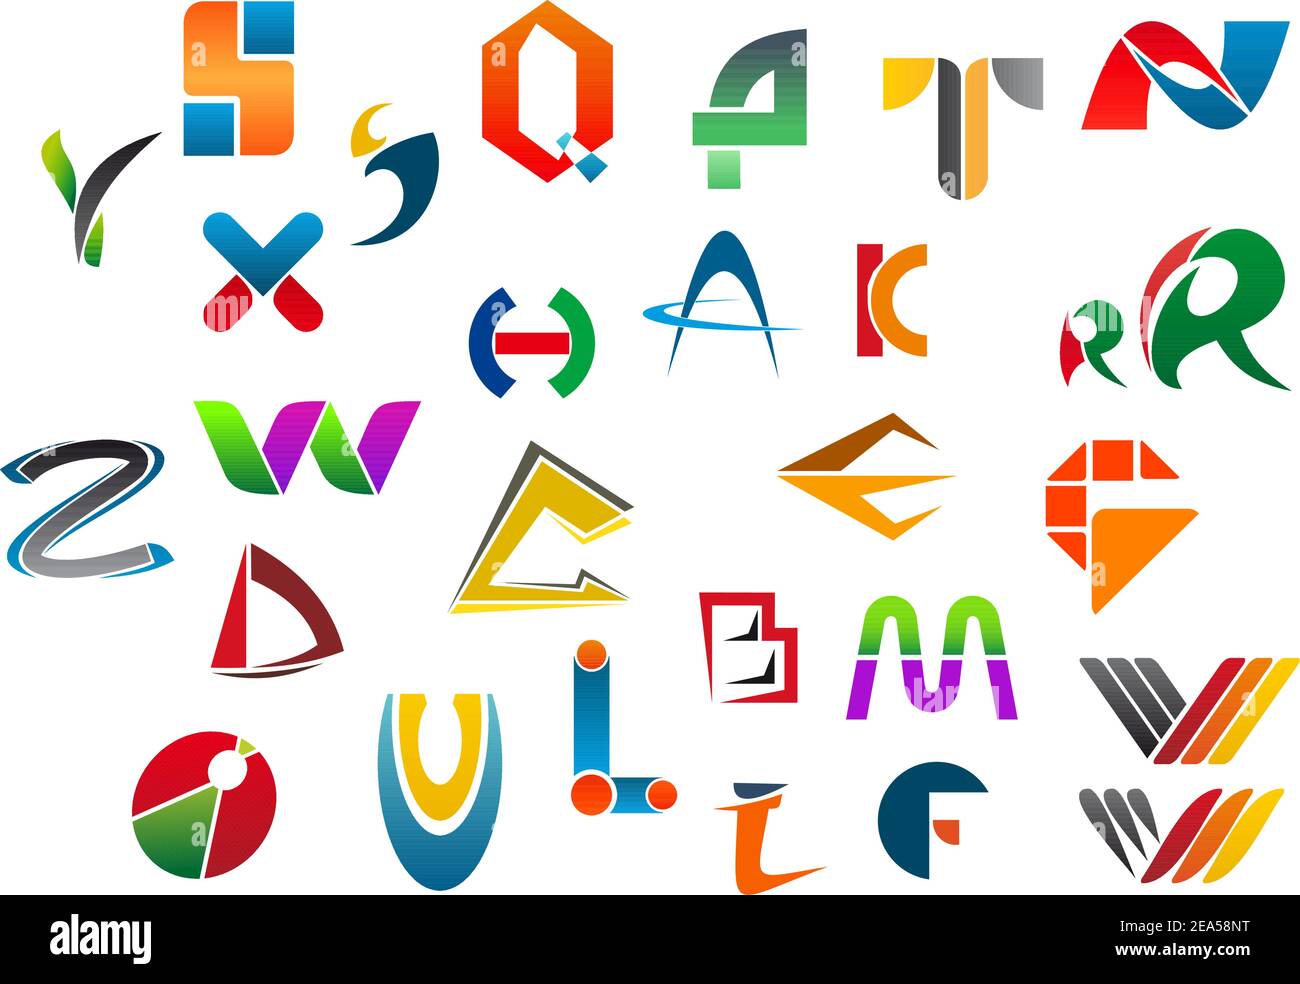 Set of alphabet symbols and icons from A to Z Stock Vector